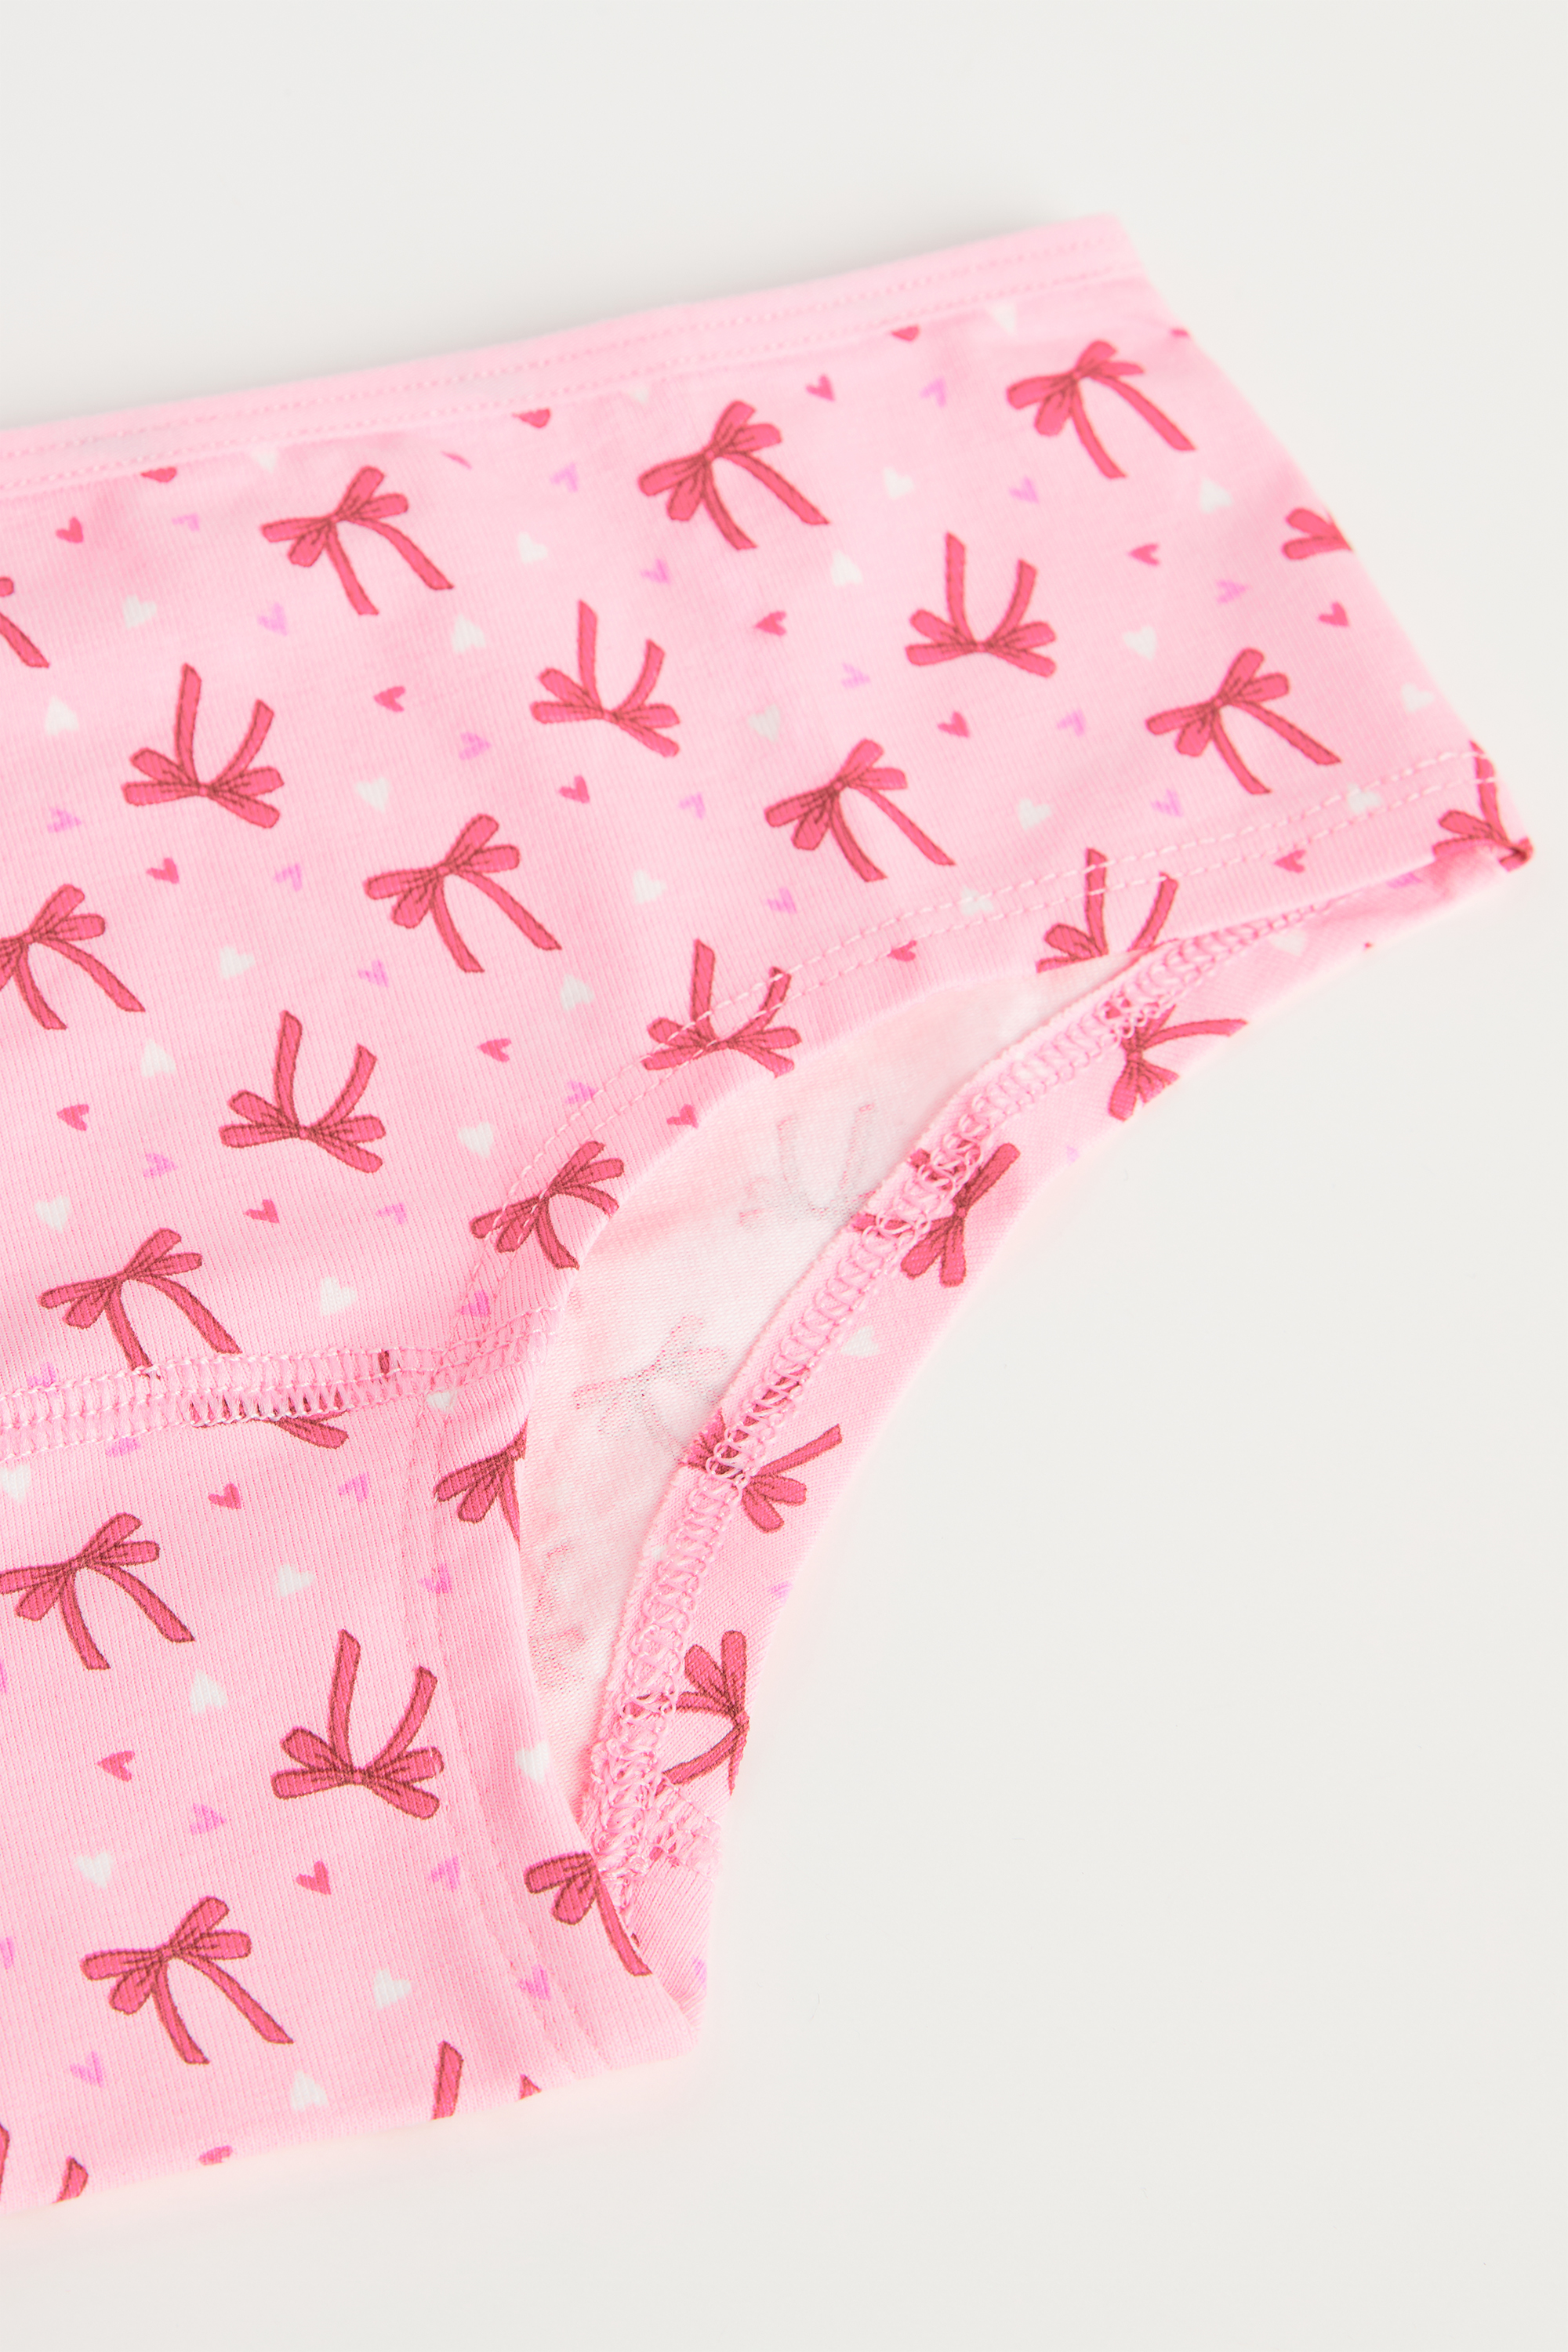 Girls’ Basic Printed Cotton French Knickers